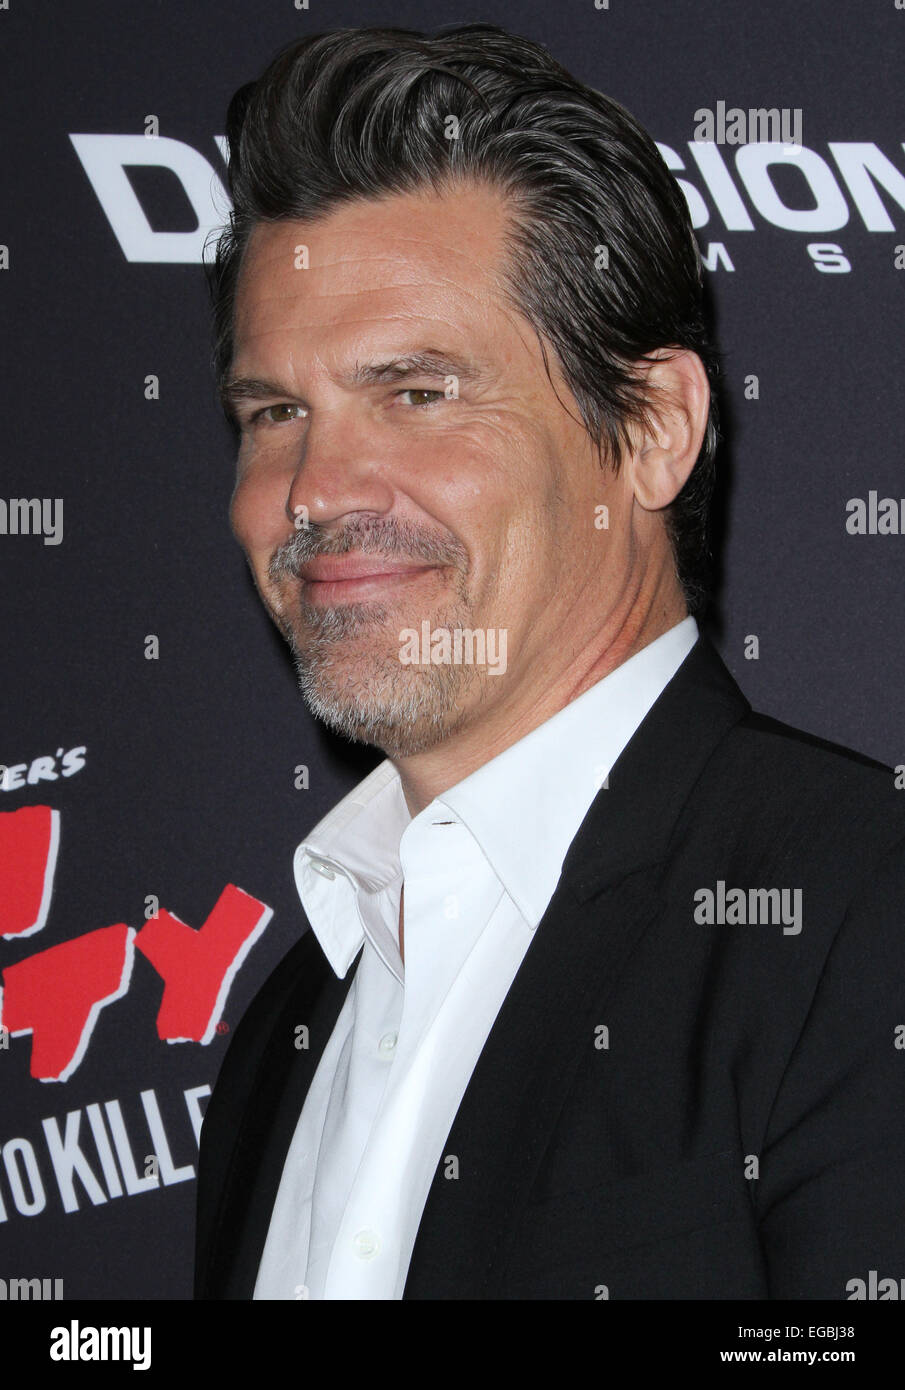 Sin City: A Dame To Kill For Premiere held at the TCL Chinese Theatre Featuring: Josh Brolin Where: Los Angeles, California, United States When: 20 Aug 2014 Stock Photo